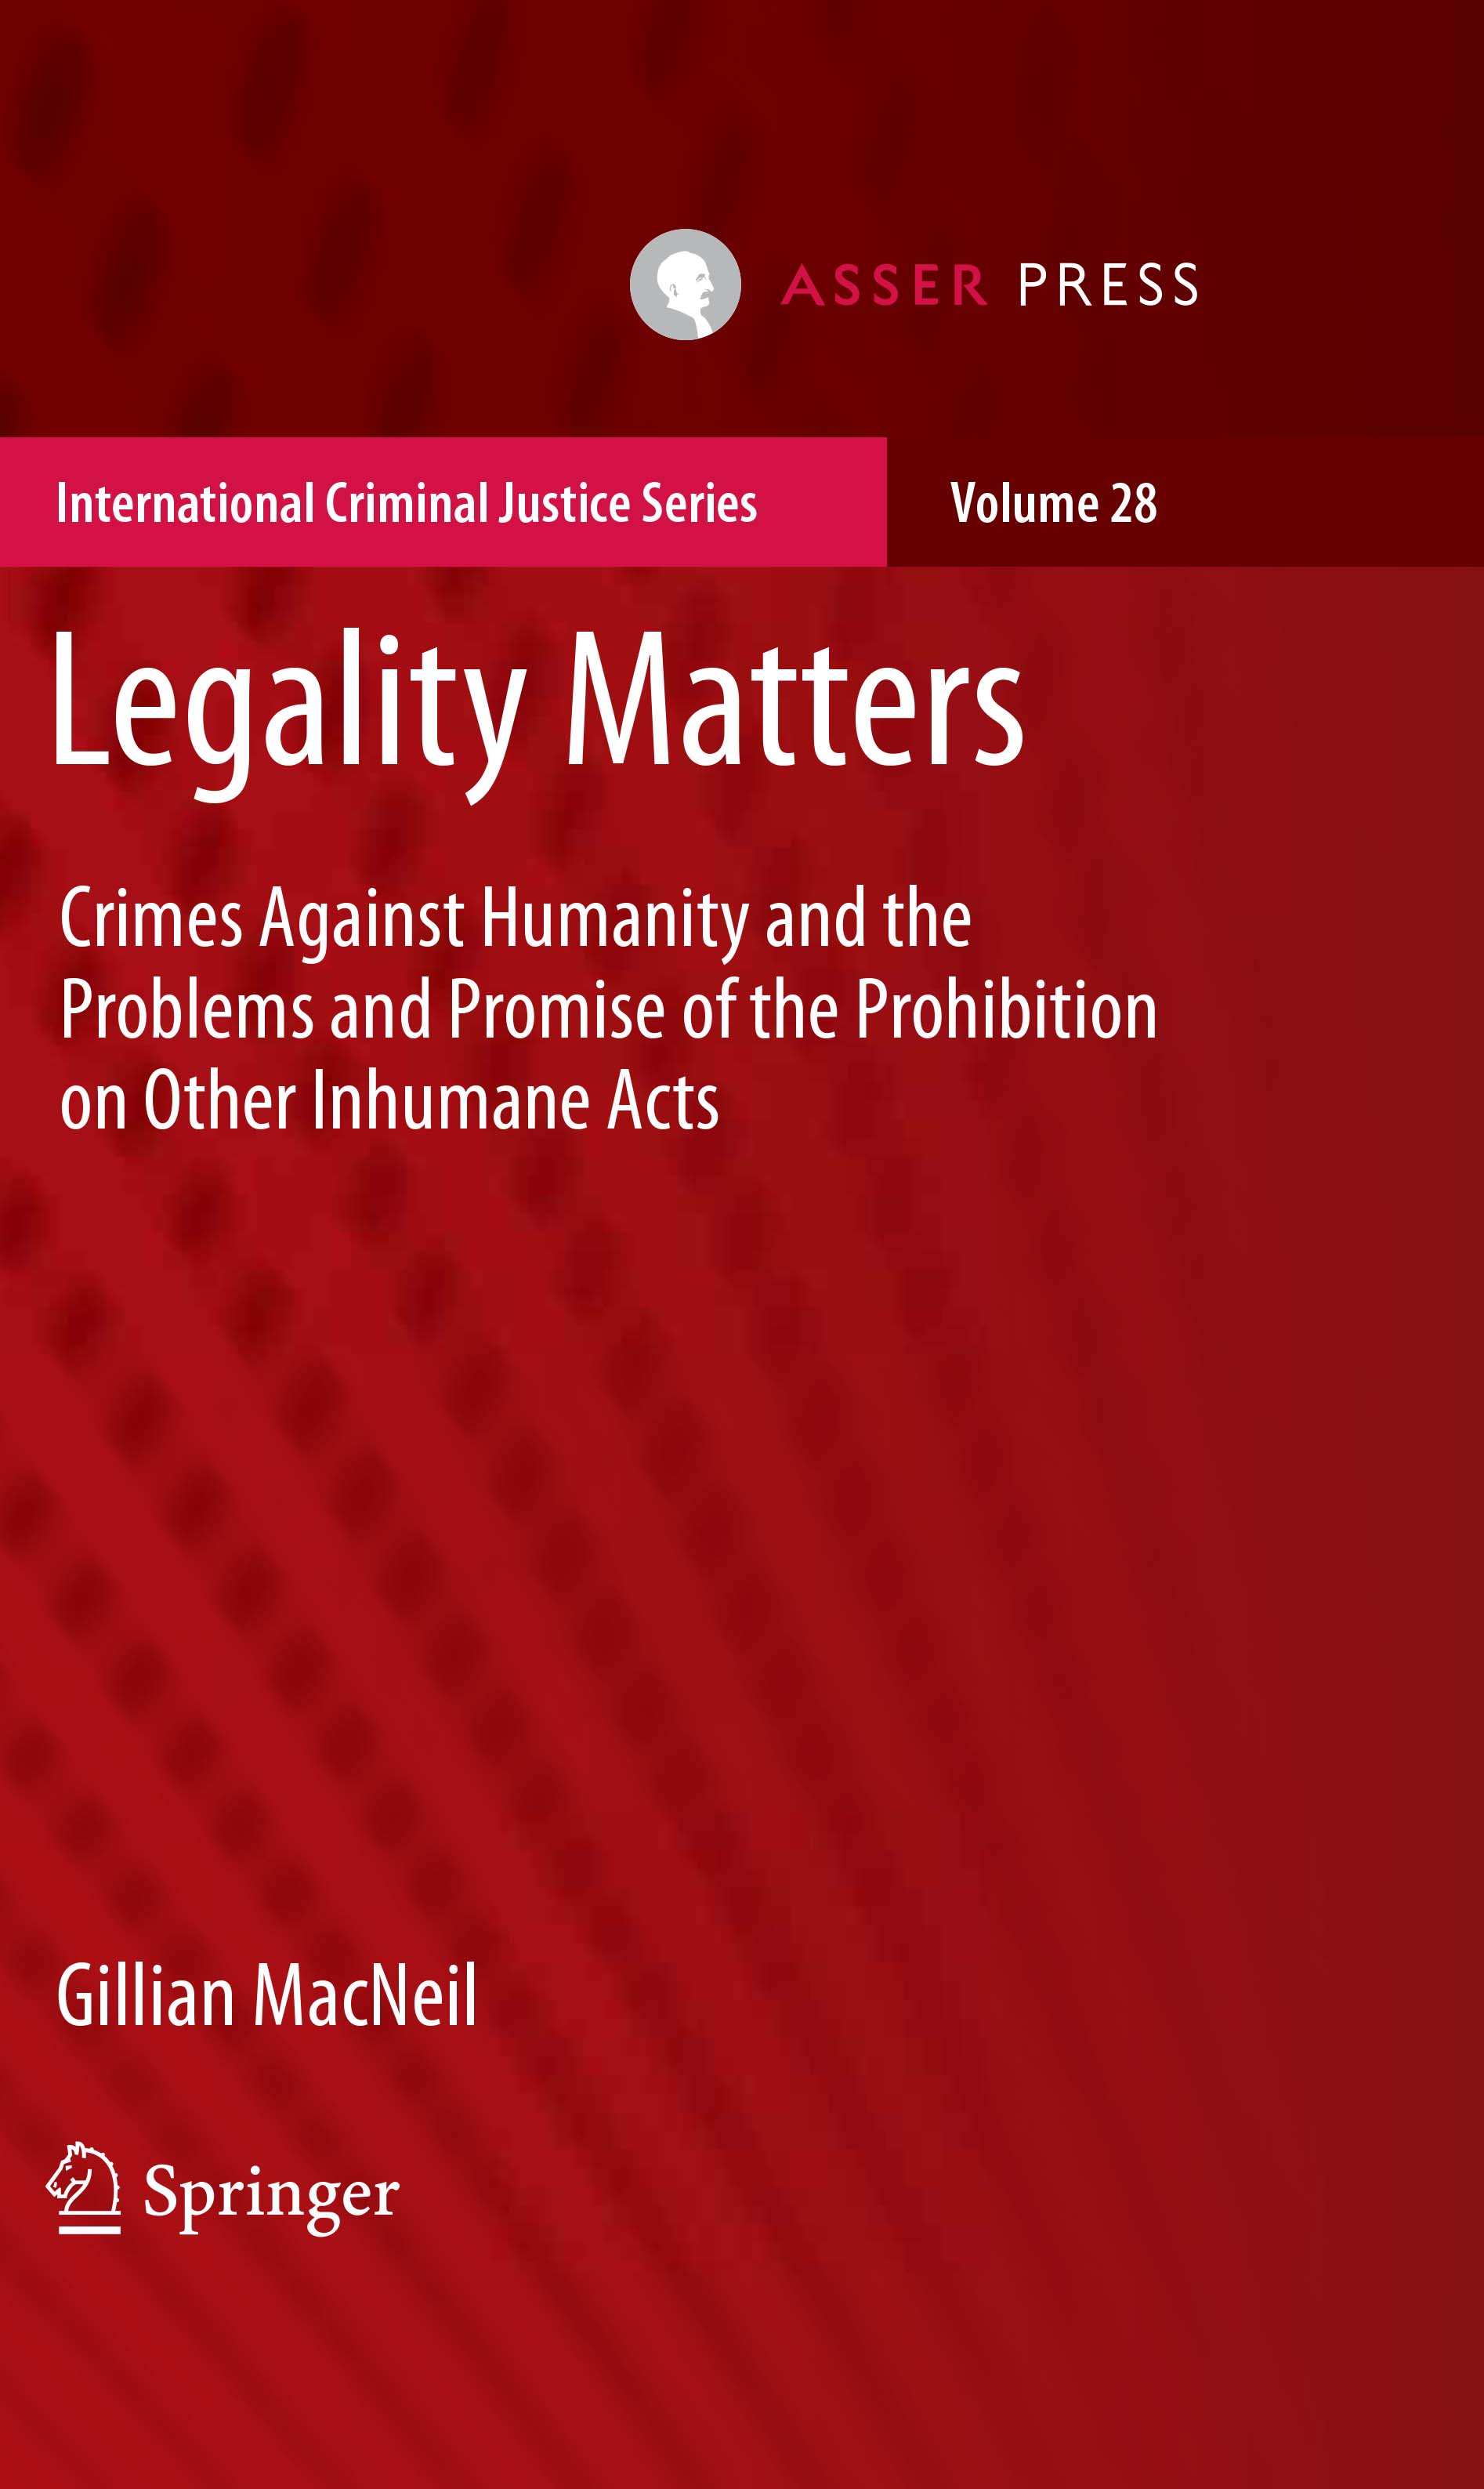 Legality Matters - Crimes Against Humanity and the Problems and Promise of the Prohibition on Other Inhumane Acts